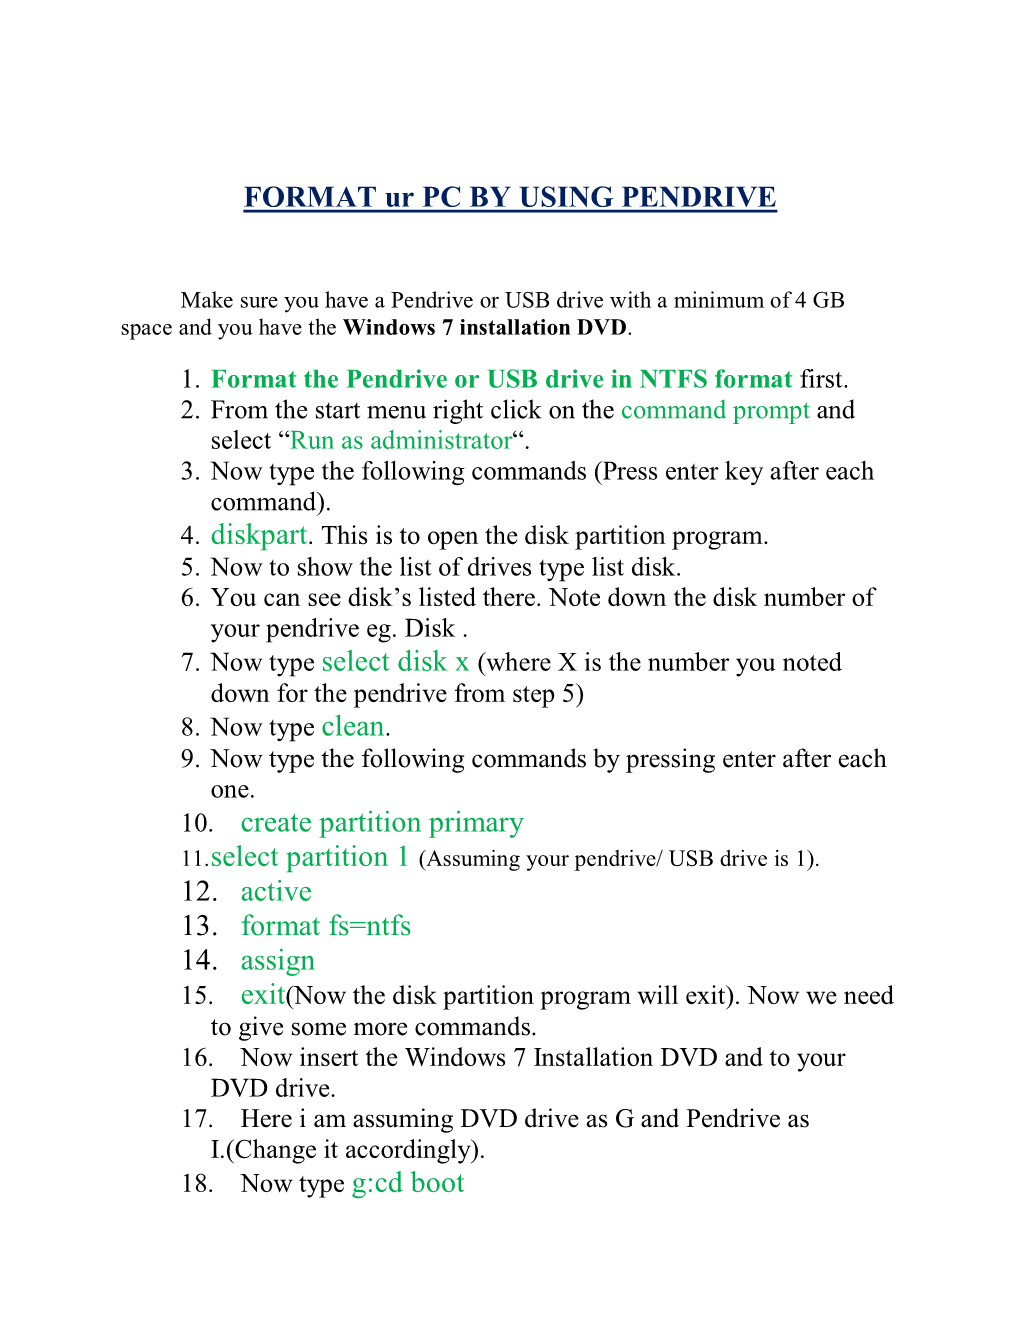 FORMAT Ur PC by USING PENDRIVE